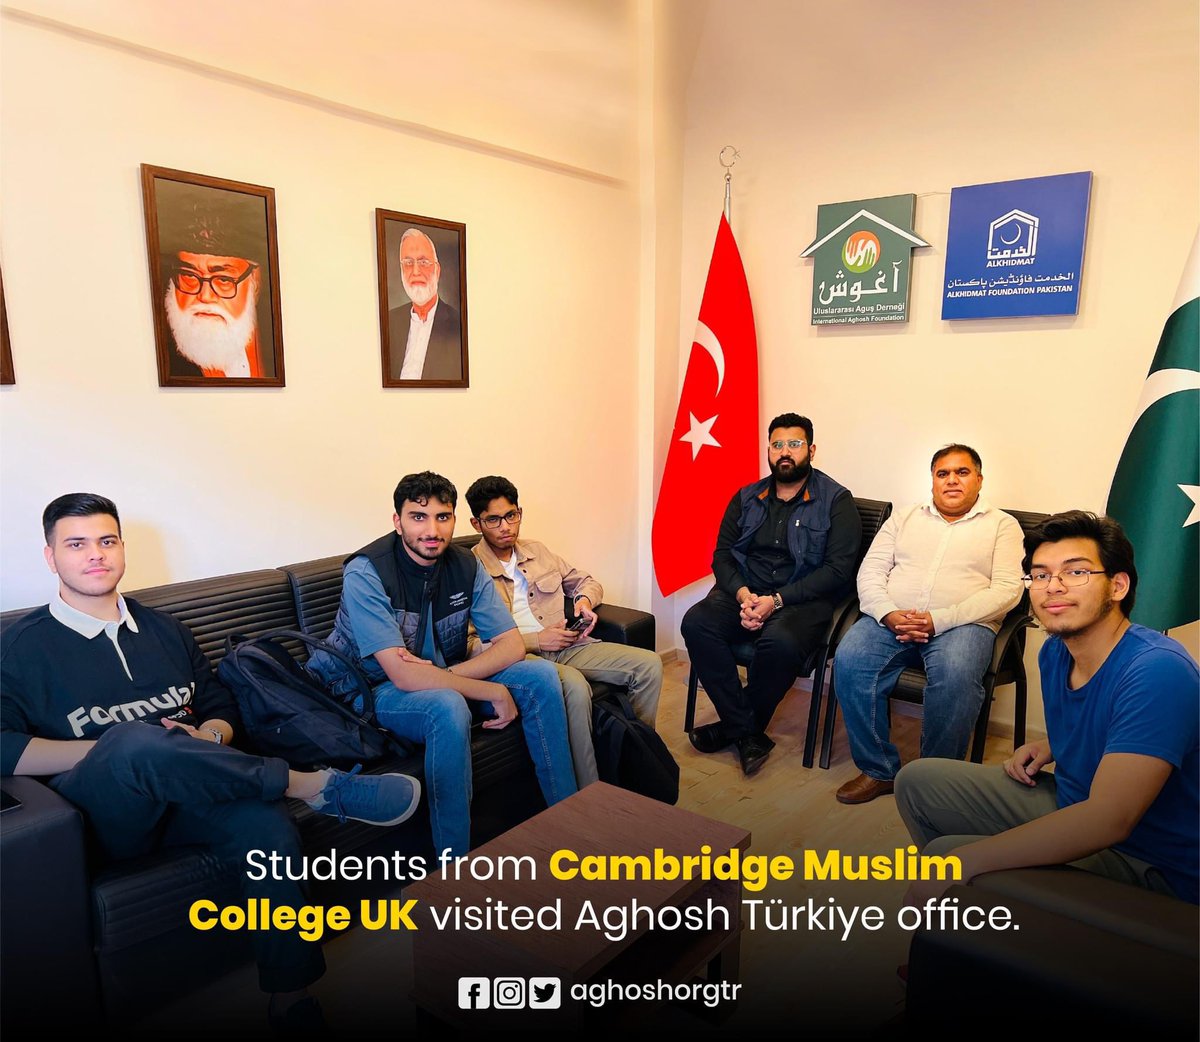 Delighted to welcome bright minds from Cambridge Muslim College , UK, to our Aghosh Türkiye office! 🤝 Sharing visions for a better tomorrow 🌟. 

#AghoshTürkiye #cambridgemuslimcollege #BuildingBridges